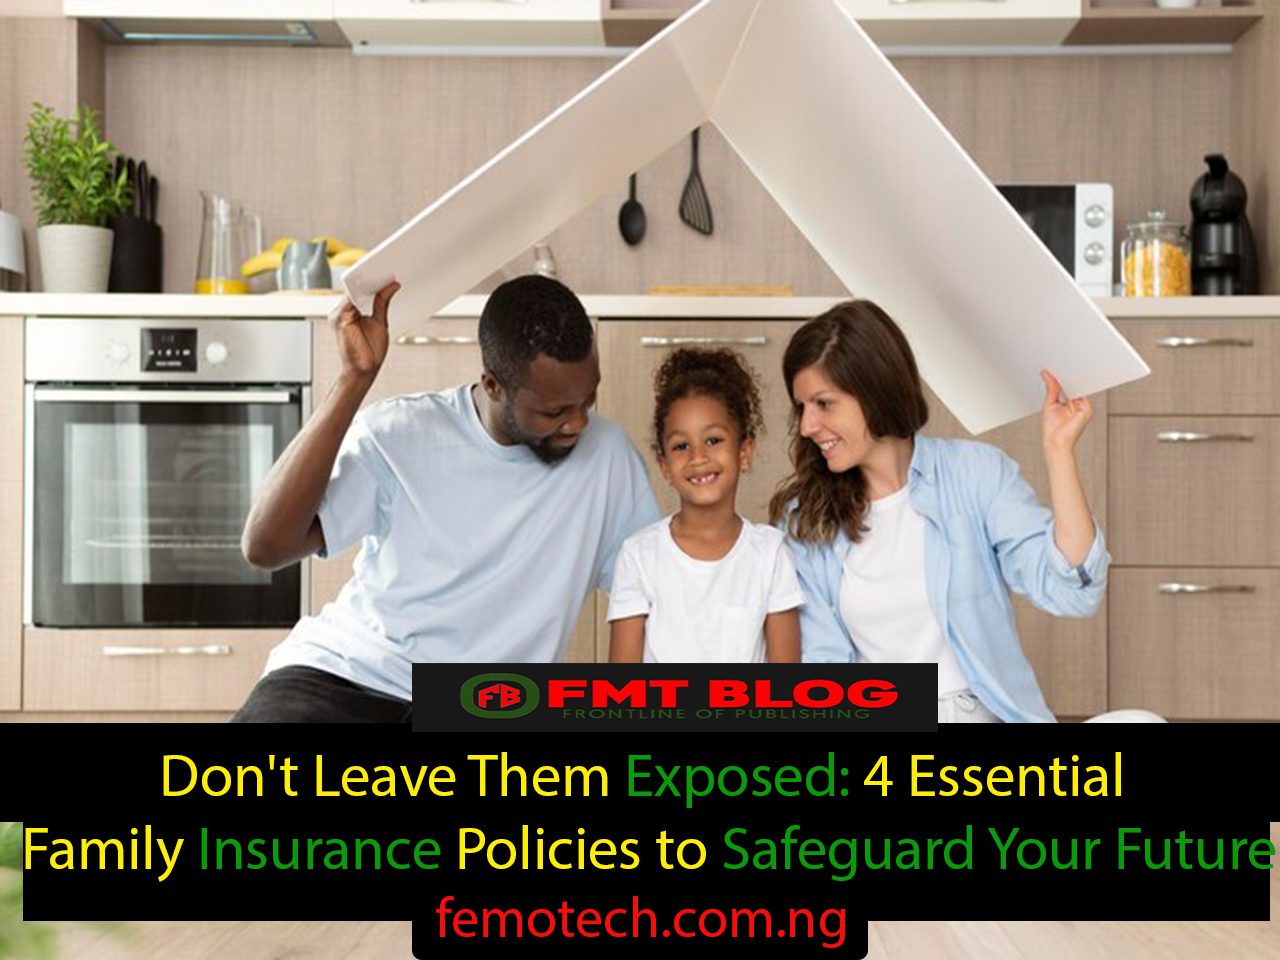 Don’t Leave Them Exposed: 5 Essential Family Insurance Policies to Safeguard Your Future